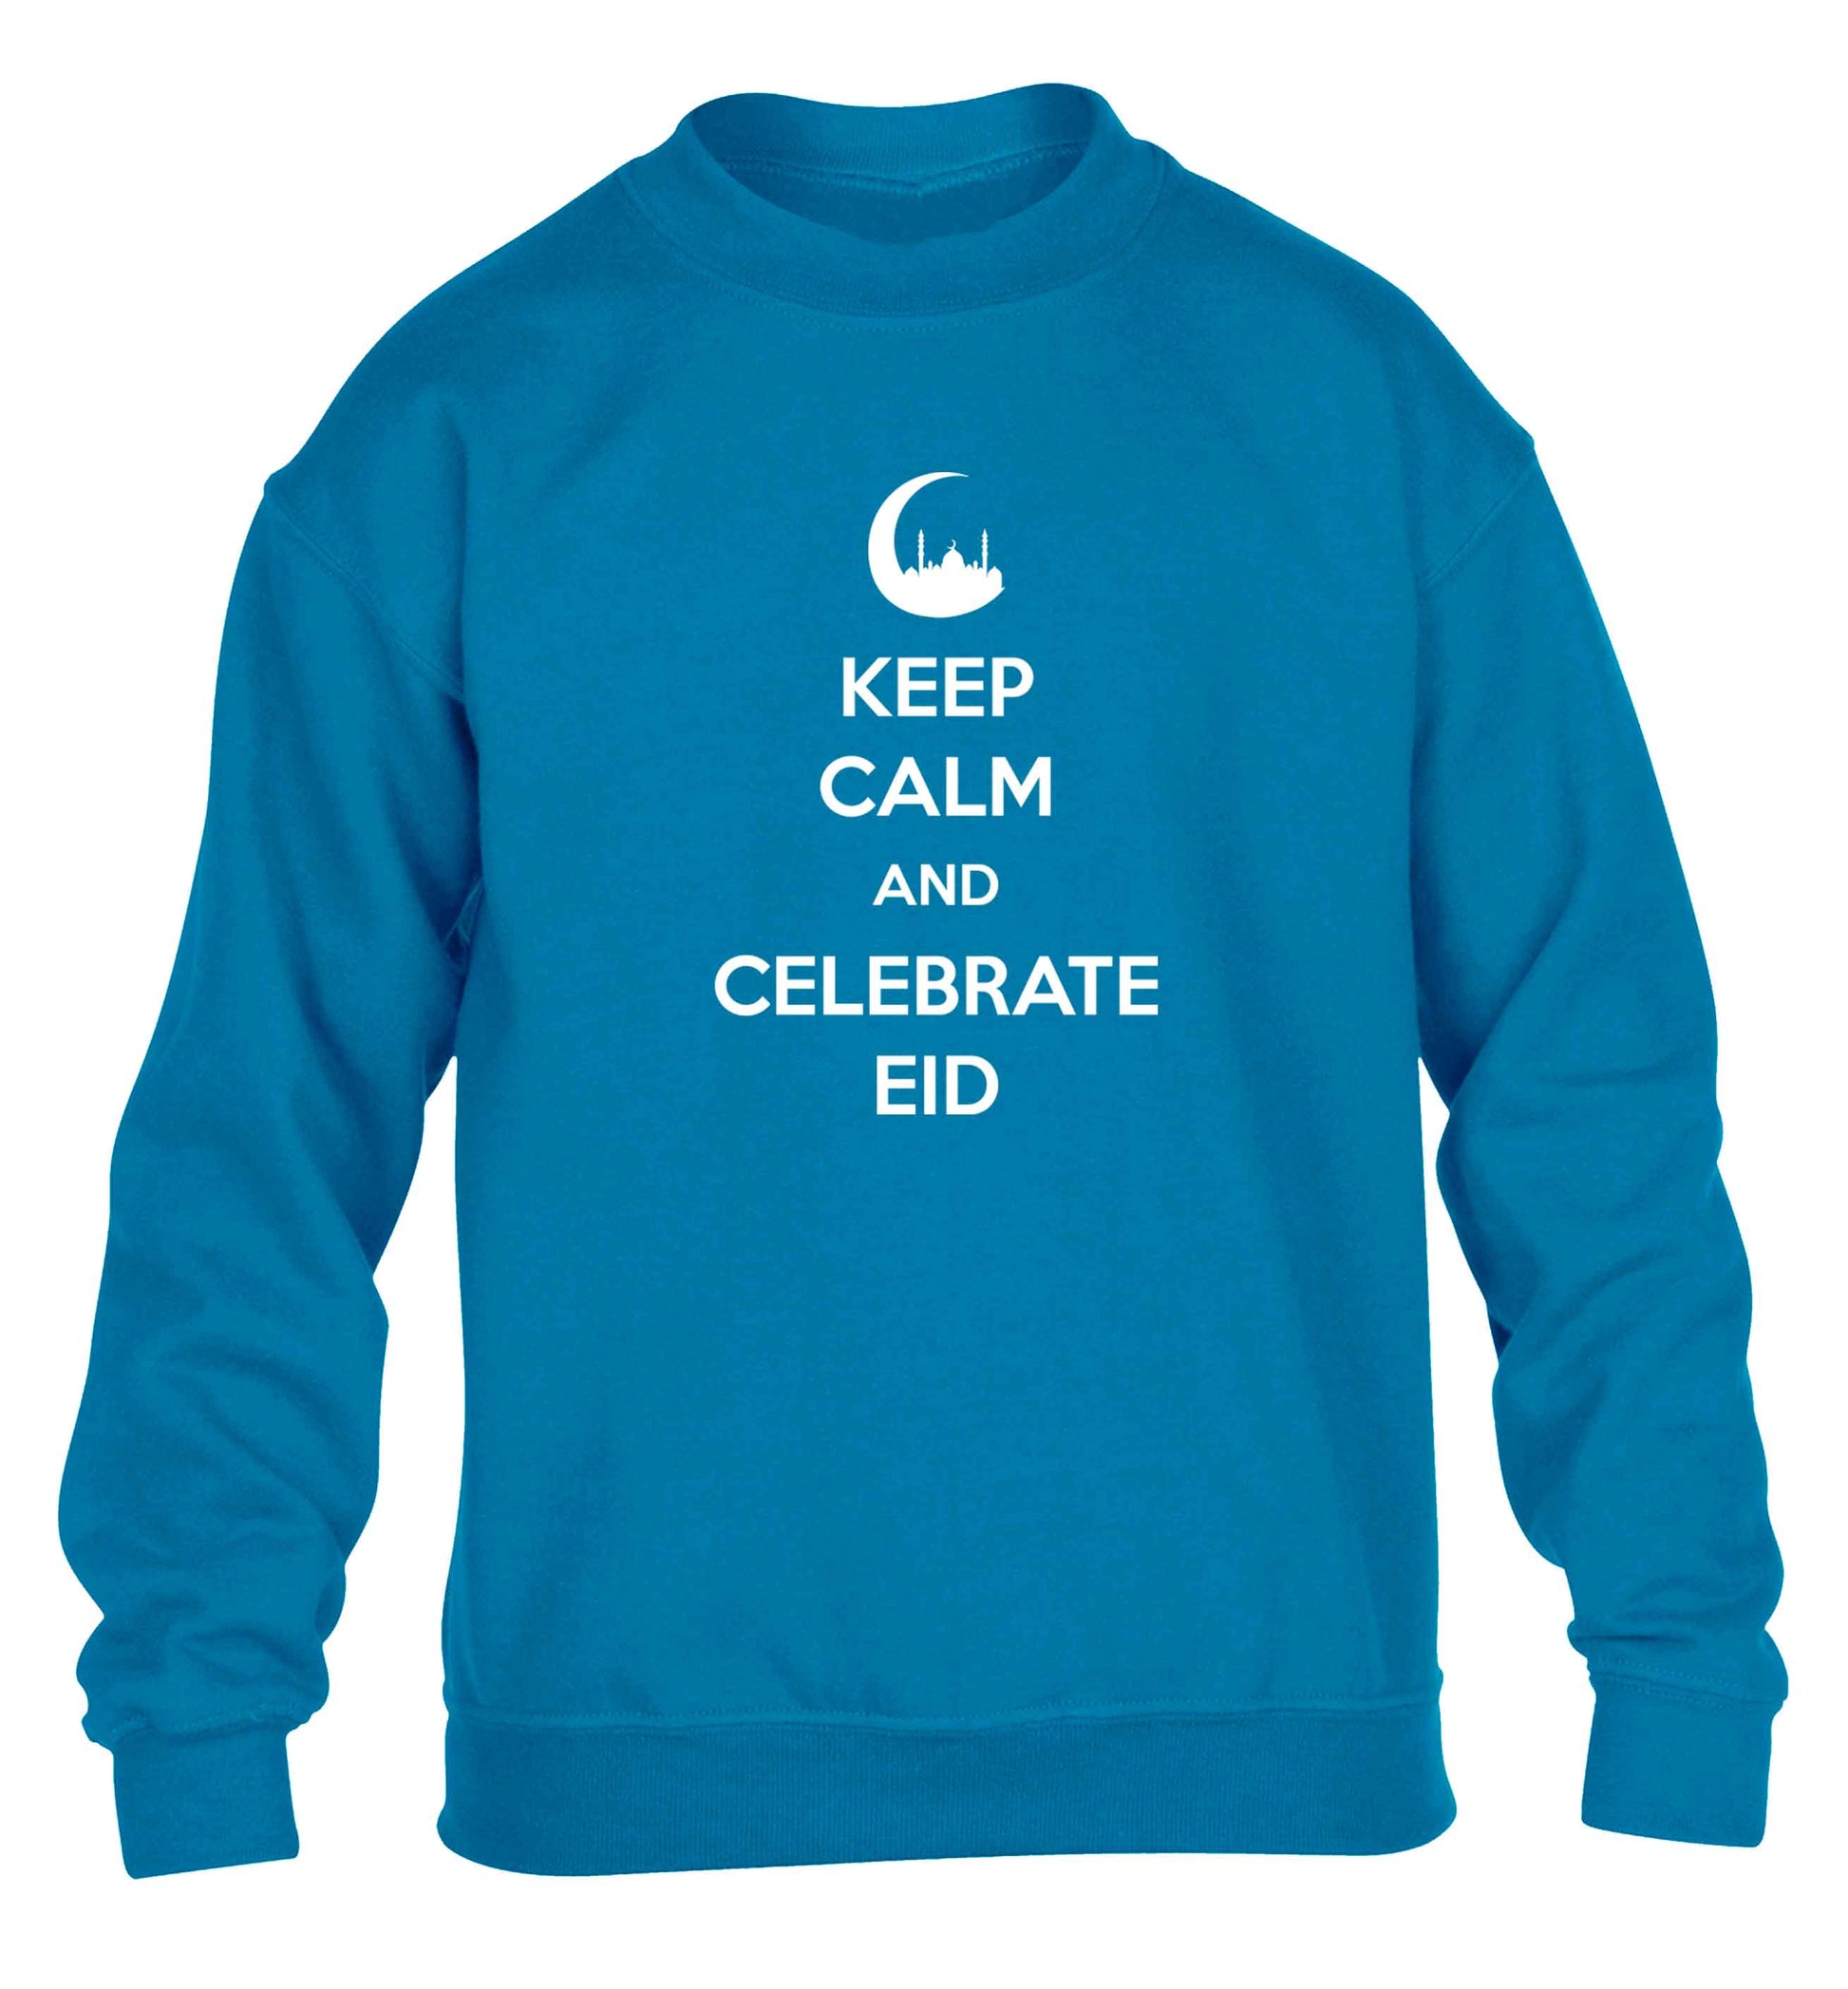 Keep calm and celebrate Eid children's blue sweater 12-13 Years